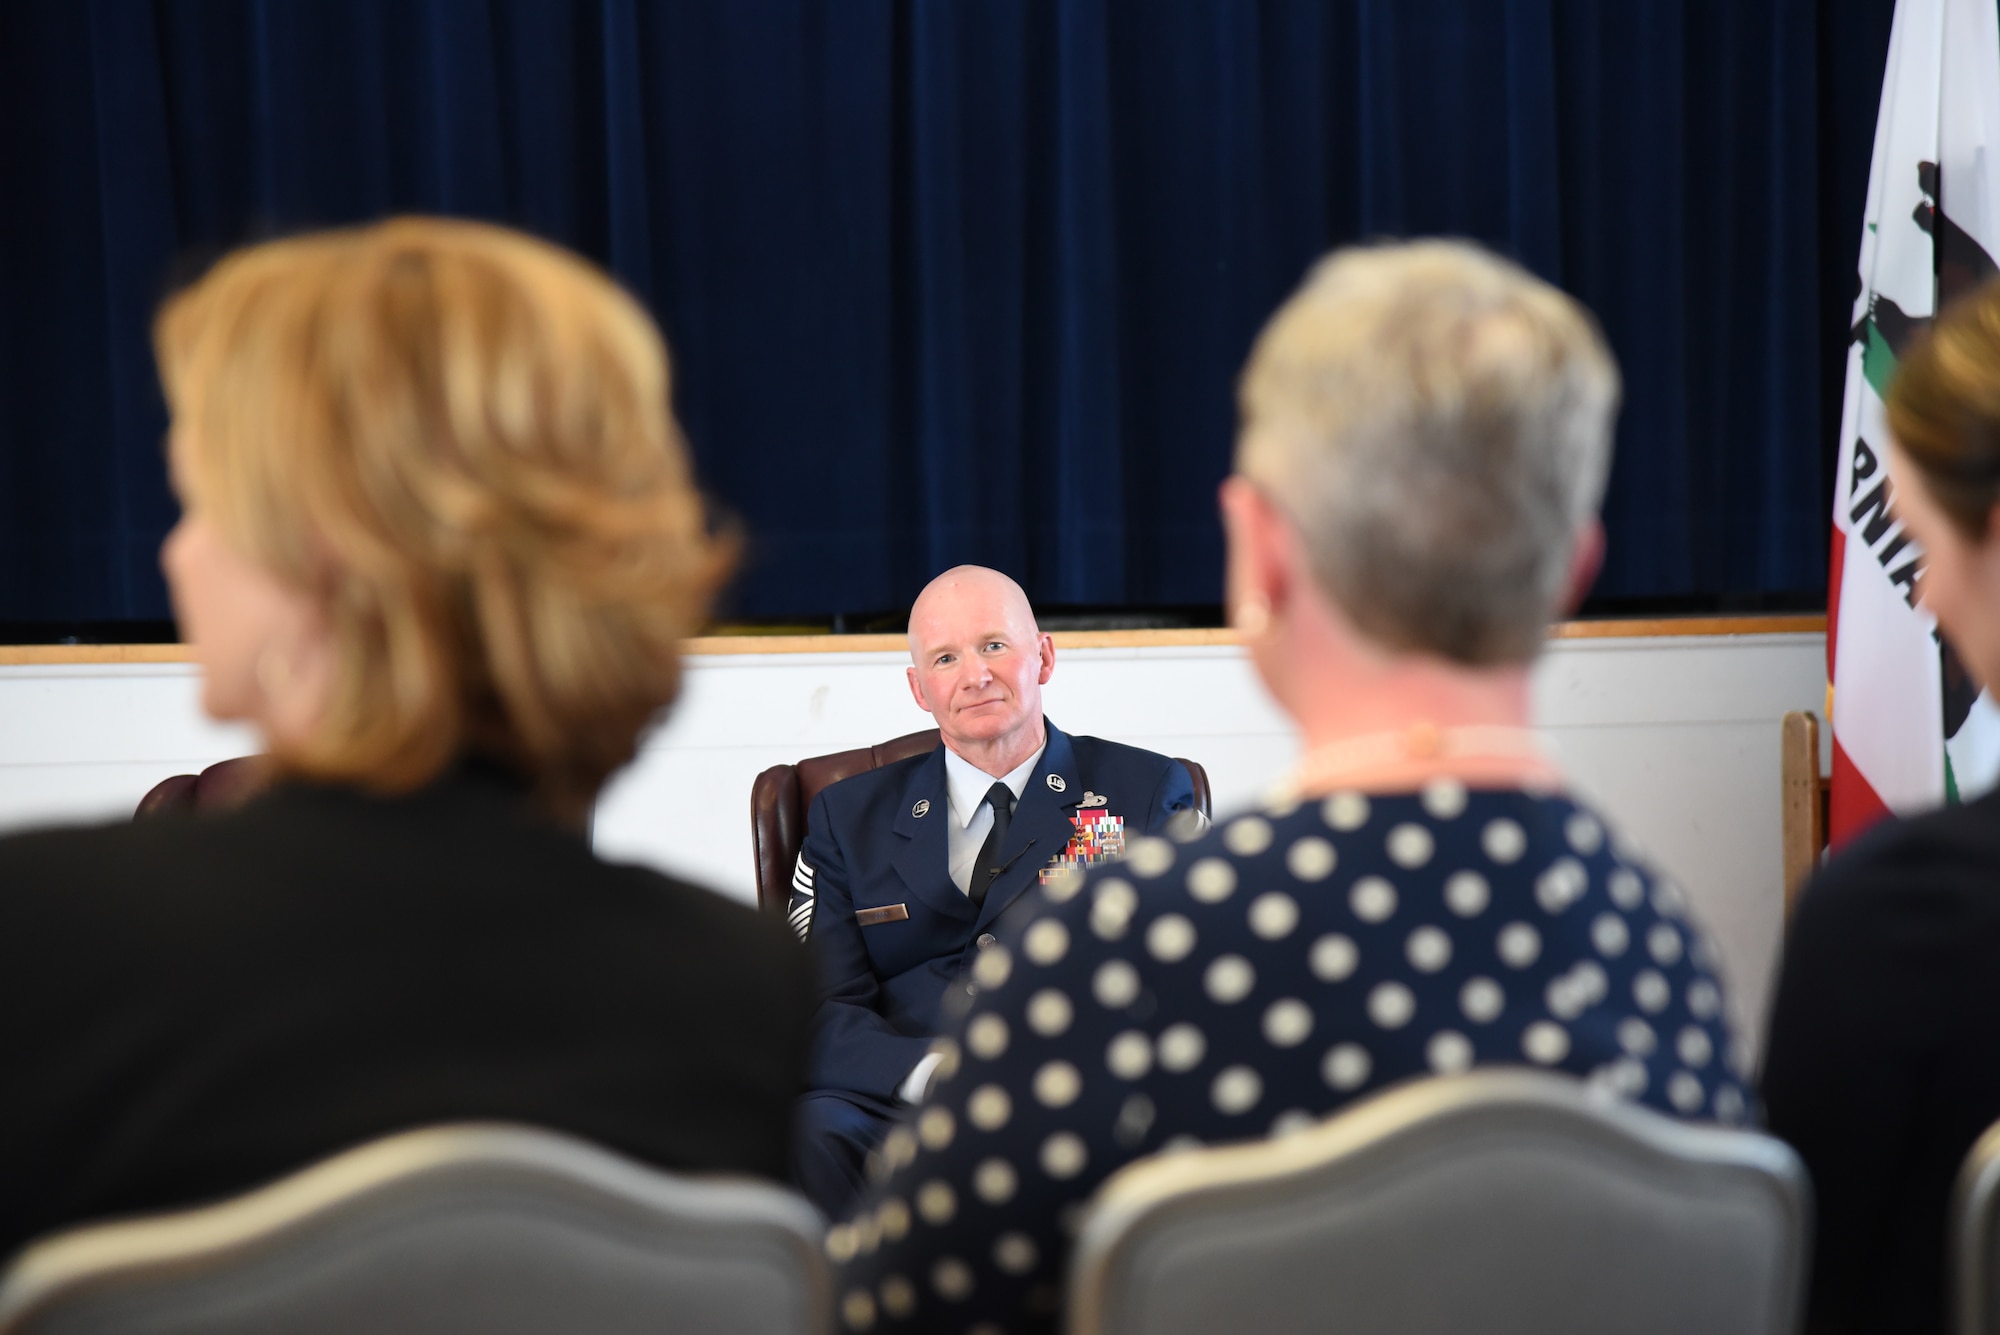 Chief Master Sgt. Thomas F. Good, 20th Air Force command chief,  watches his wife, Tennie Good, as she is recognized during his retirement ceremony March 5, 2019, at F. E. Warren Air Force Base, Wyo. Chief Good retired as the 20th Air Force command chief in the presence of his wife, children and friends. (U.S. Air Force photo by Senior Airman Nicole Reed)